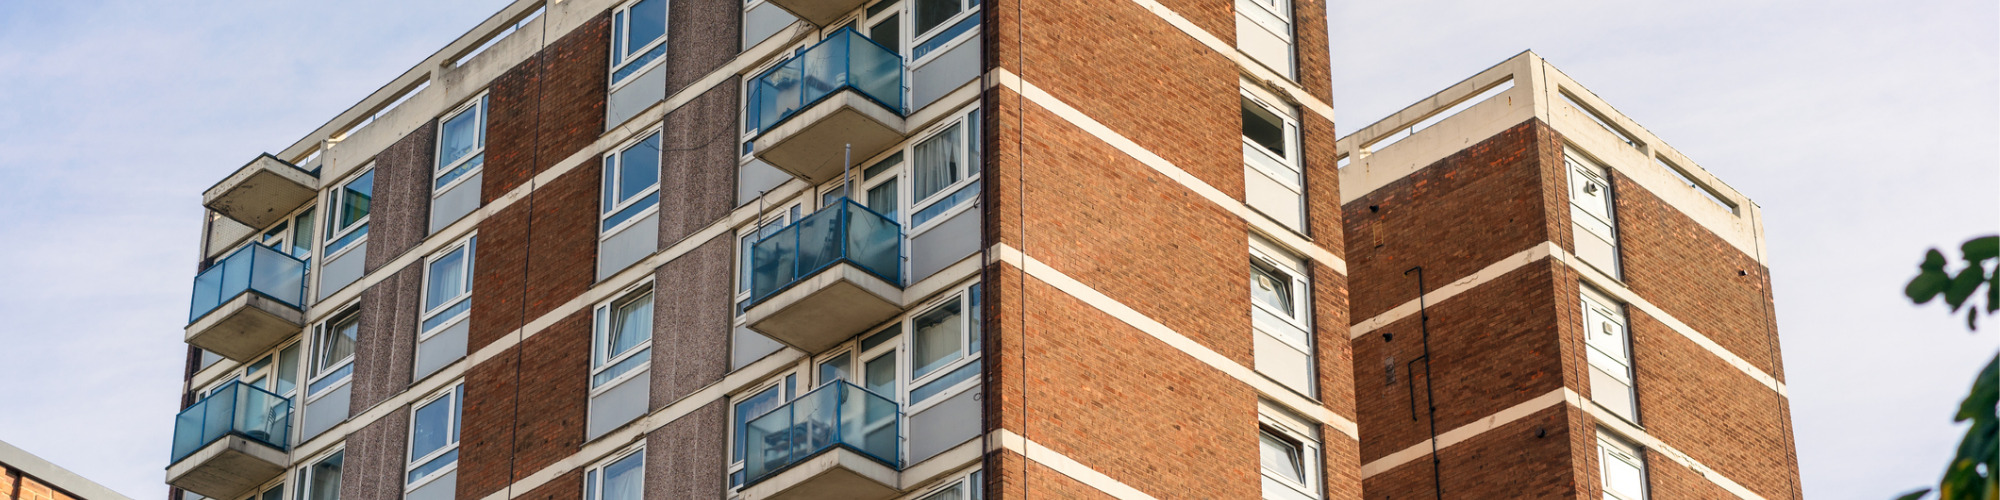 Challenging Social Housing Allocation Policies - Key Areas Explored